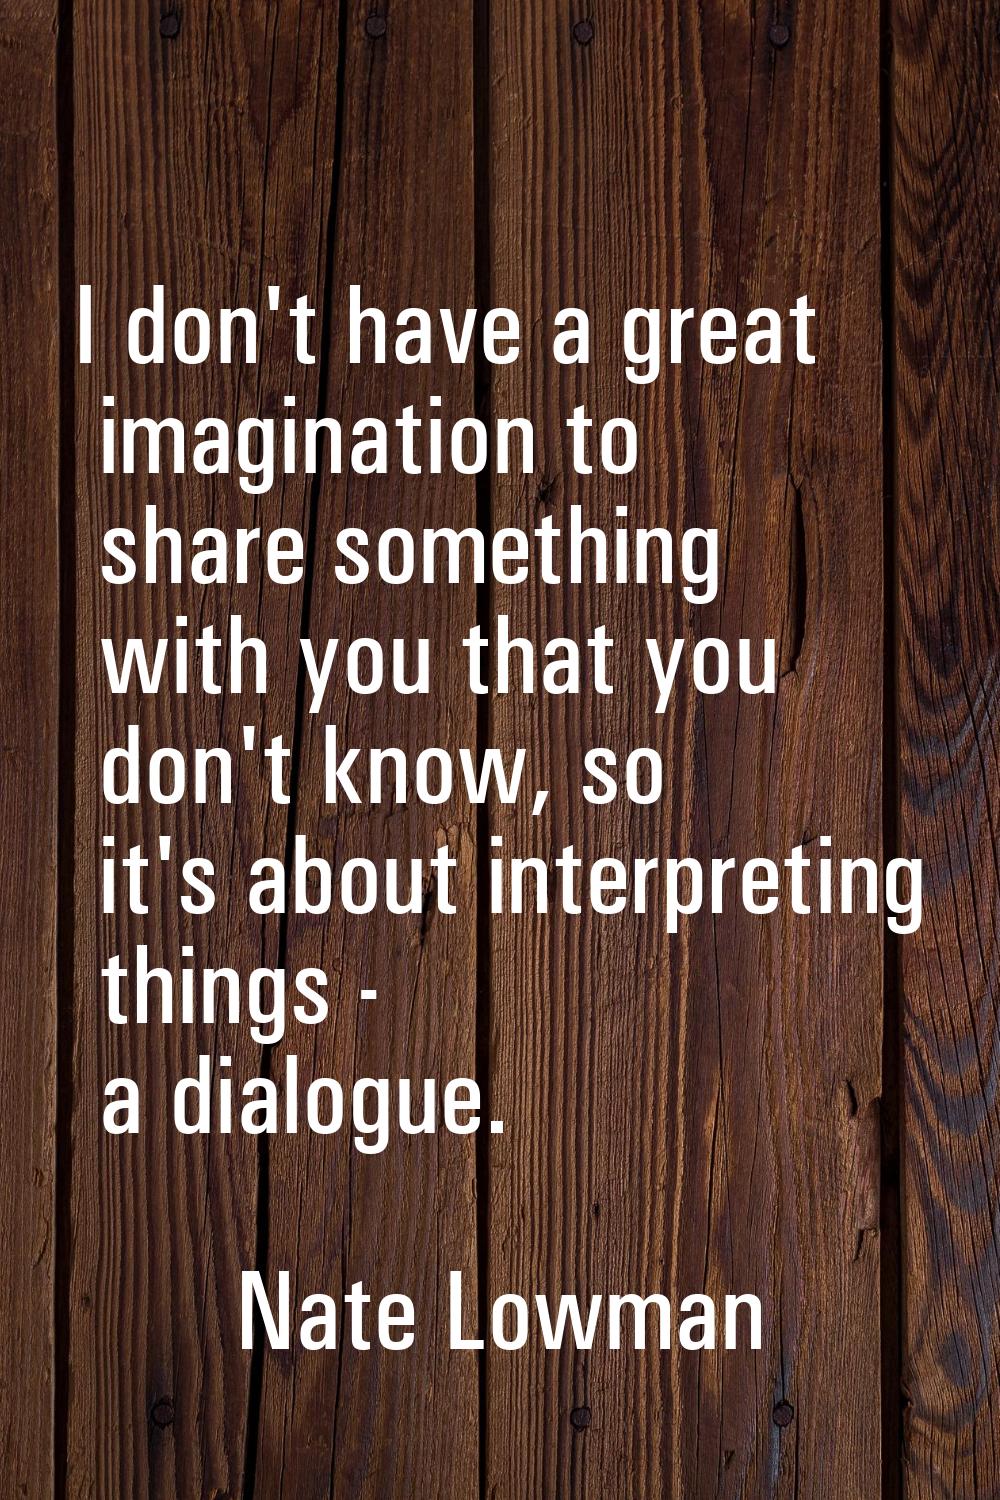 I don't have a great imagination to share something with you that you don't know, so it's about int